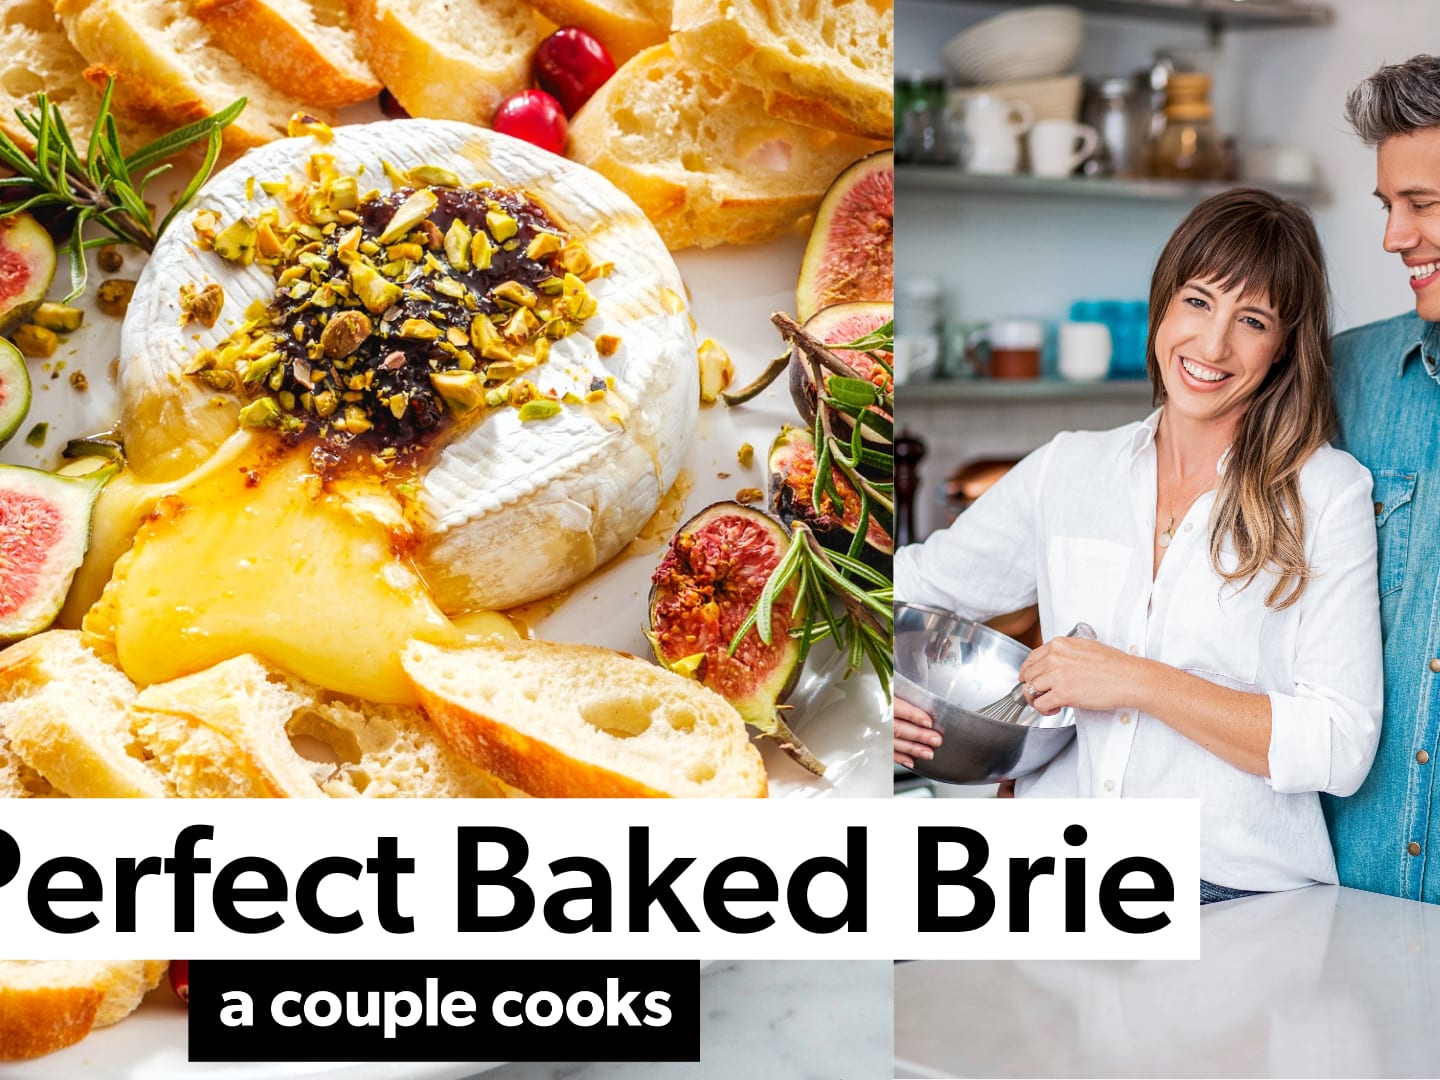 How to Bake Brie • easy perfect results!